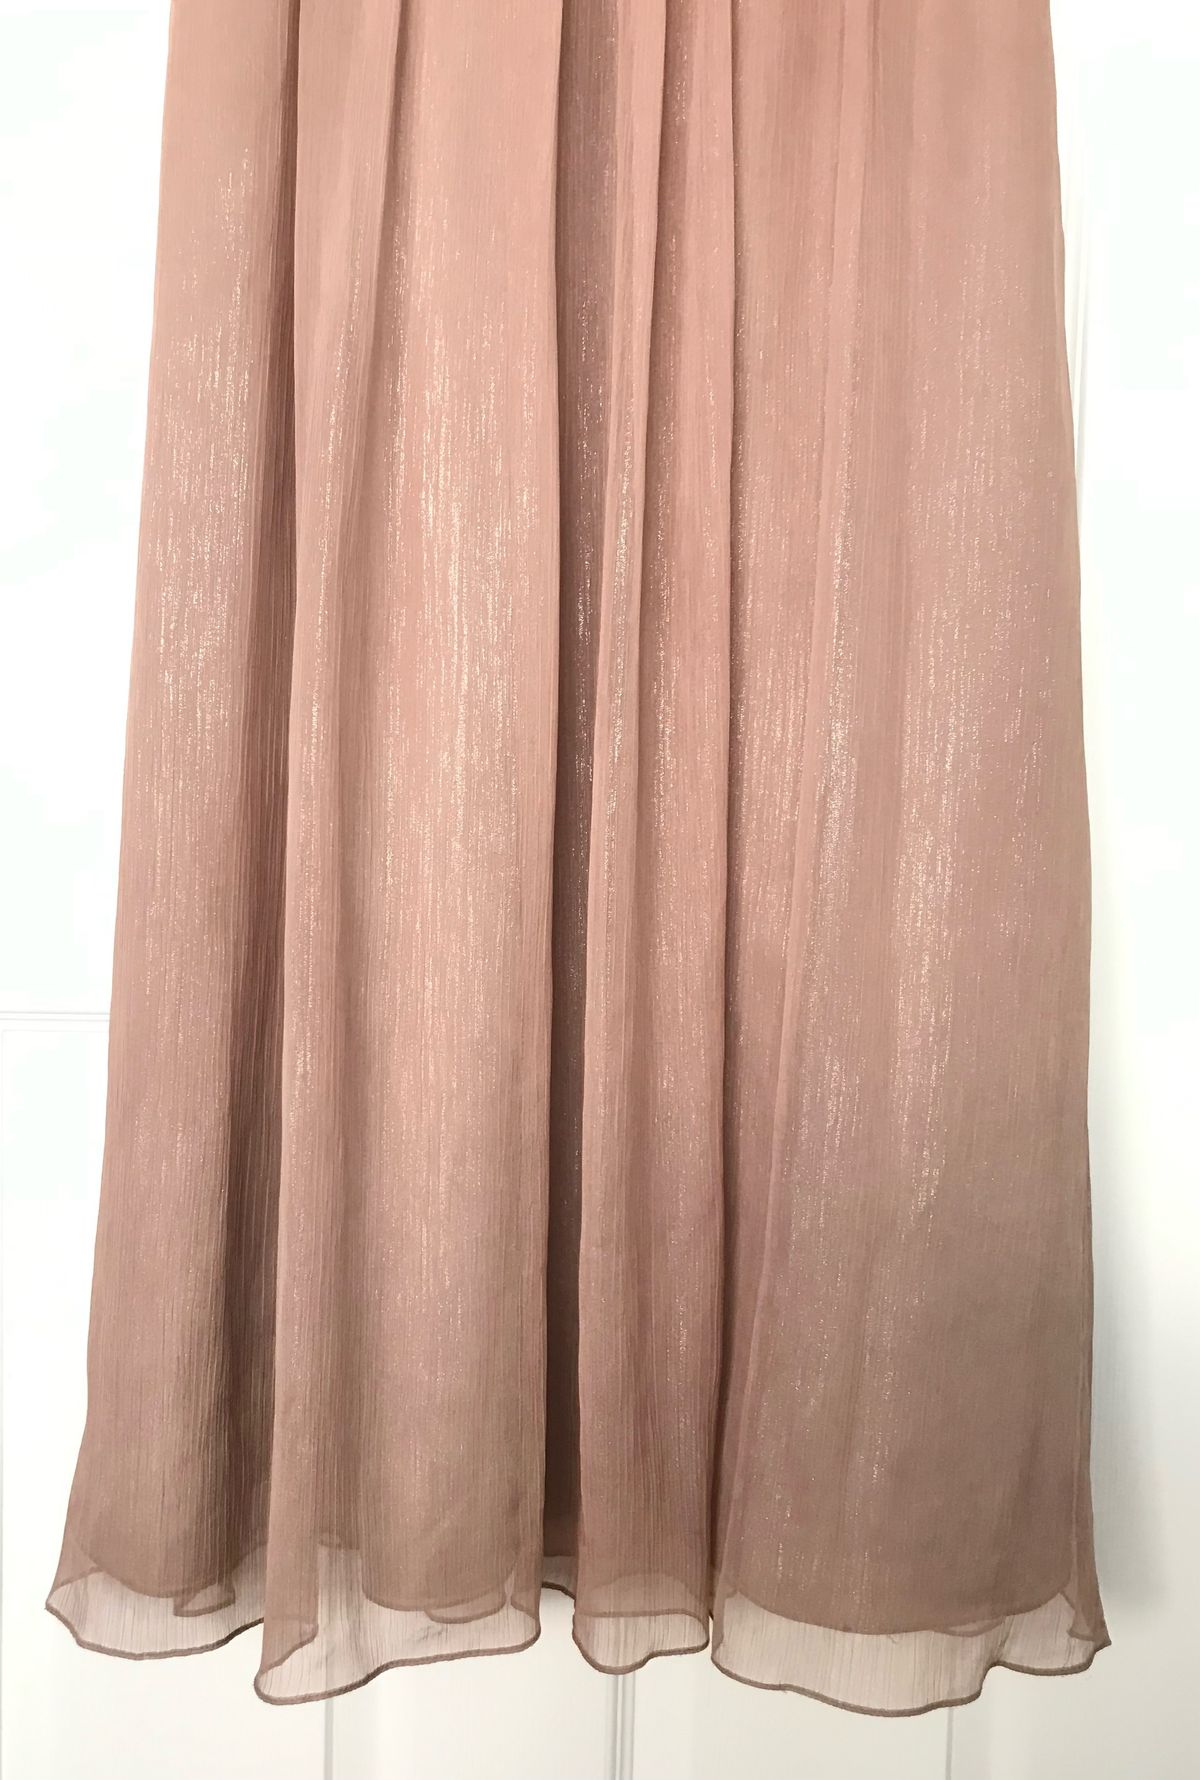 Monique Lhuillier Size 8 Bridesmaid Strapless Rose Gold Floor Length Maxi on Queenly